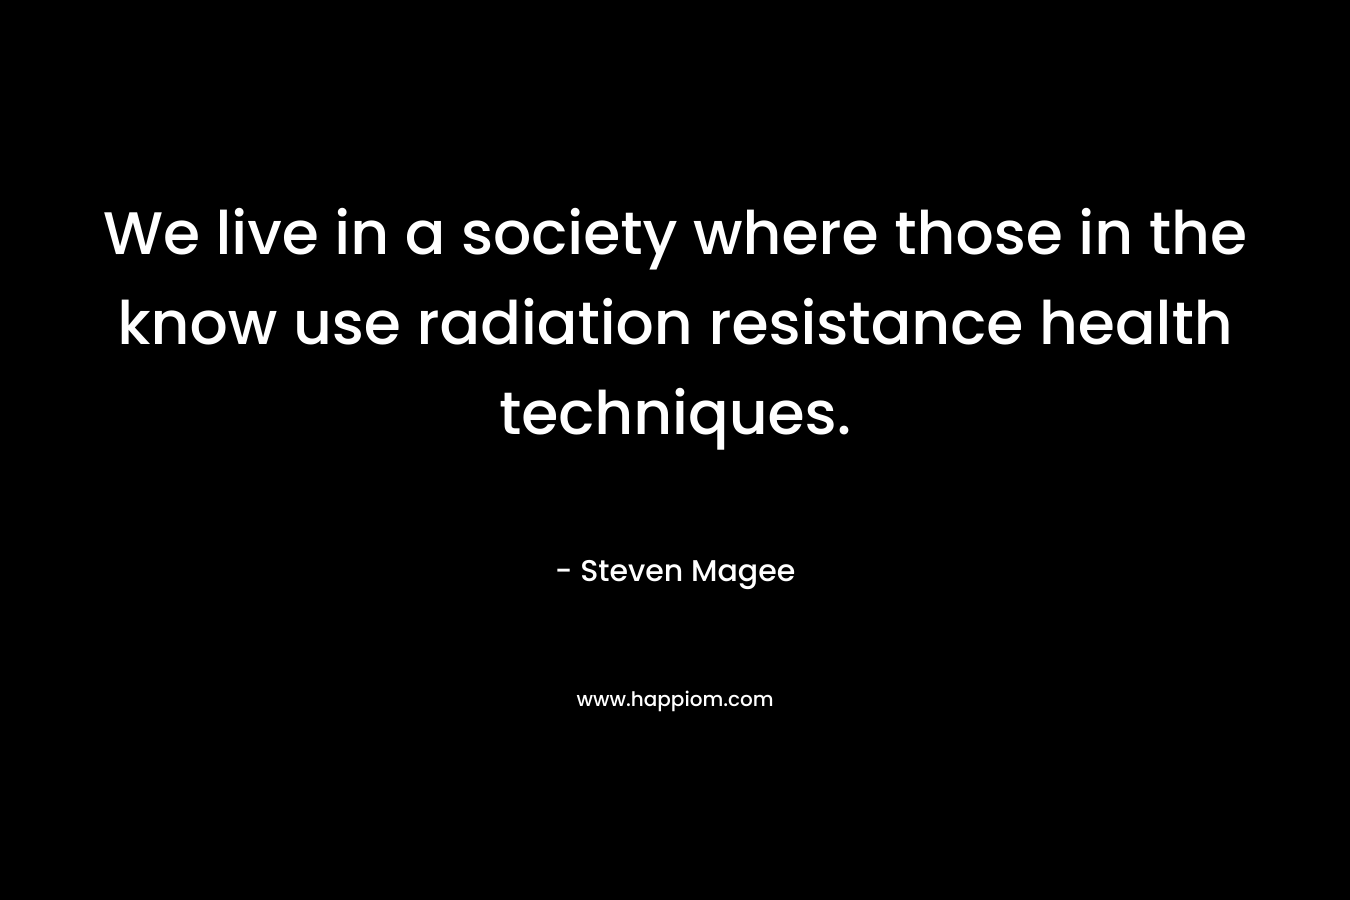 We live in a society where those in the know use radiation resistance health techniques.